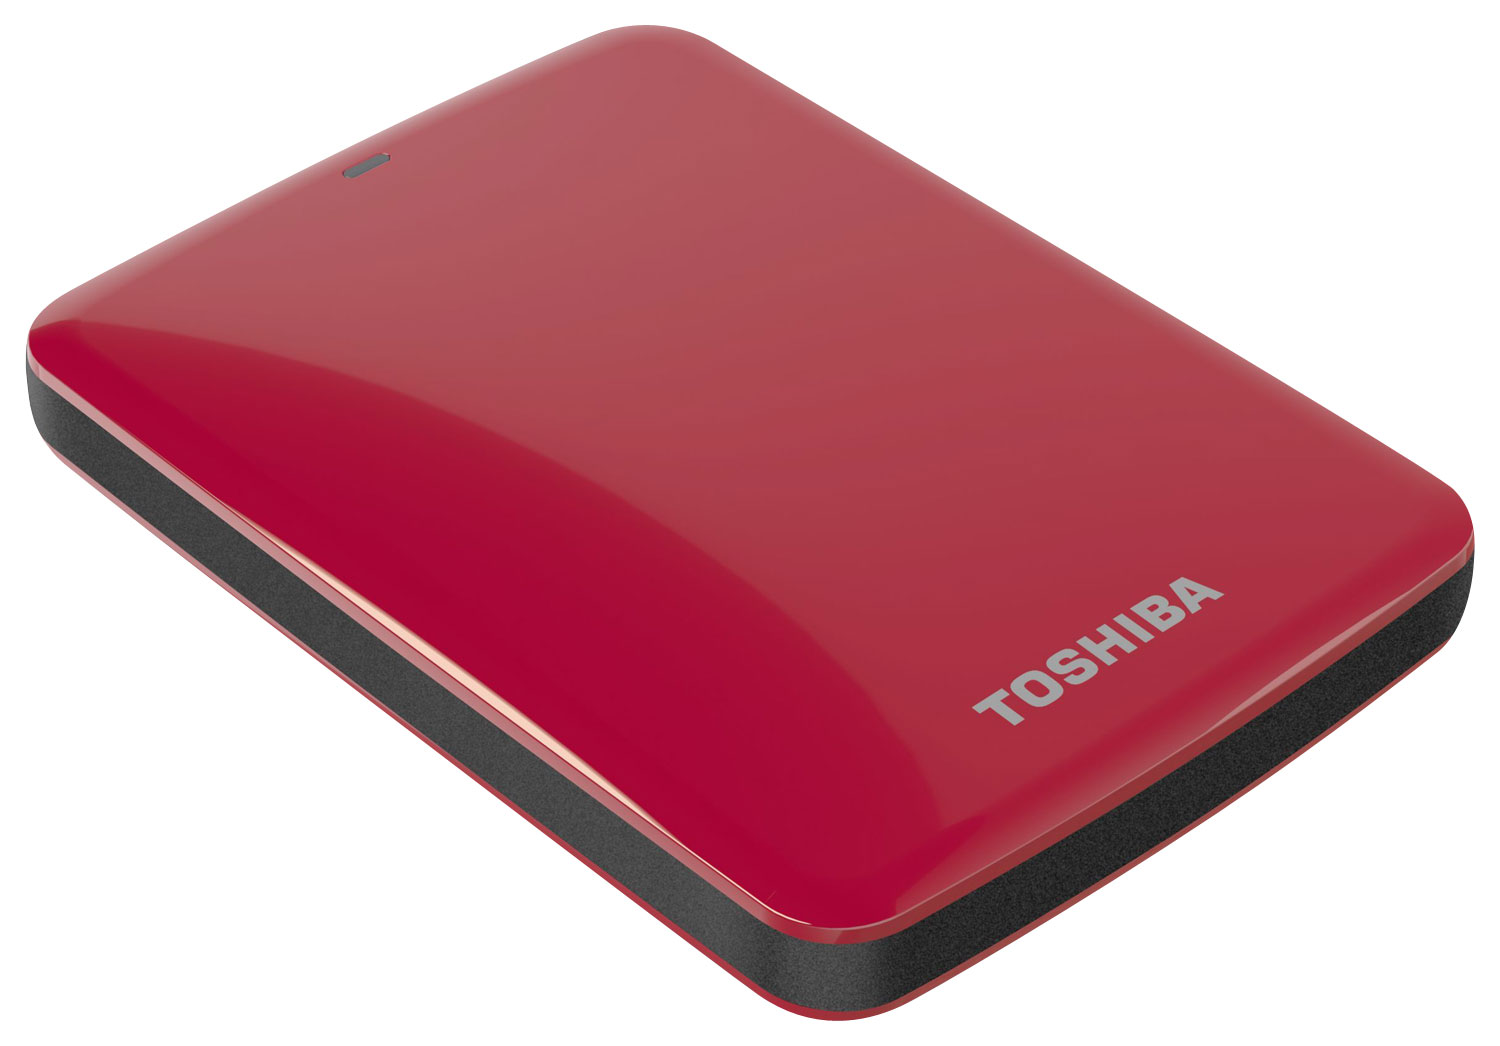 Opiaat Ruwe olie Traditioneel Toshiba Canvio Connect 2TB External USB 3.0 Hard Drive Red HDTC720XR3 -  Best Buy